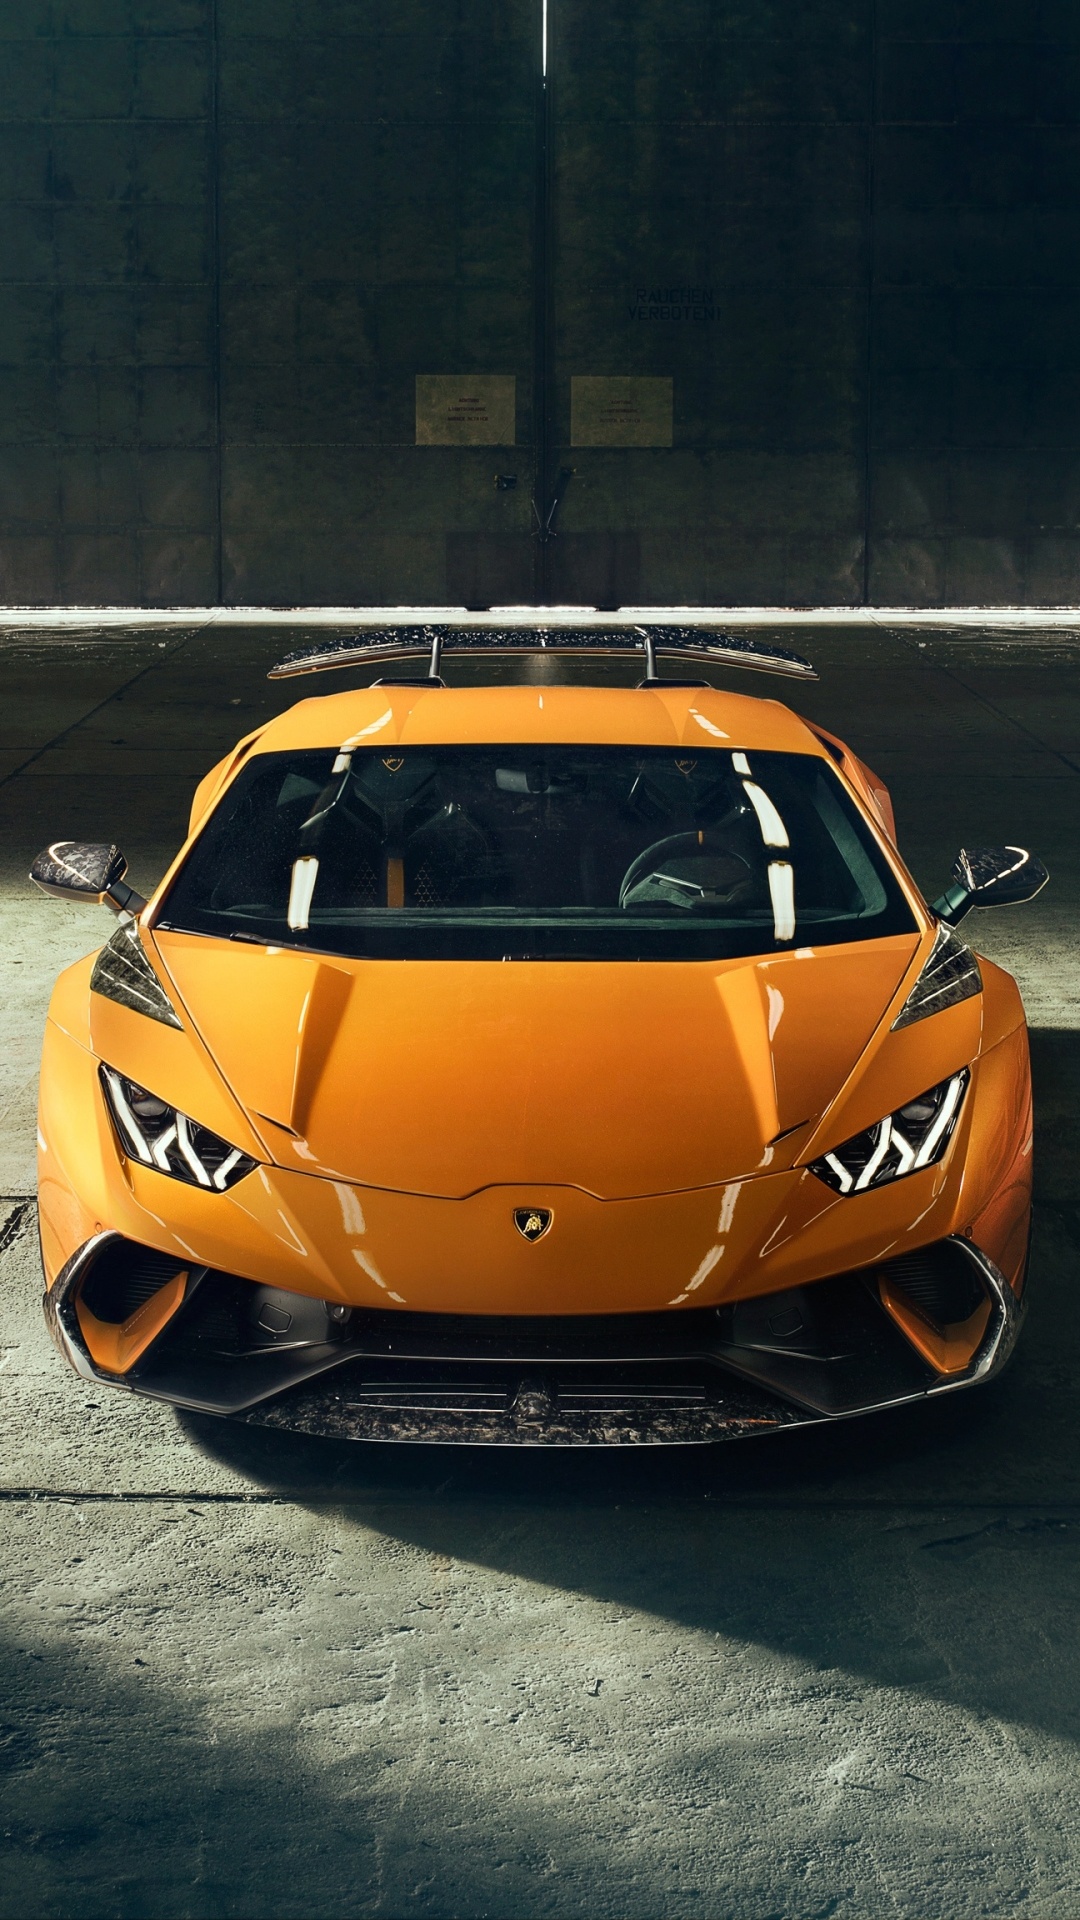 Huracan Performante vehicles, Exquisite craftsmanship, High-performance perfection, Automotive artistry, 1080x1920 Full HD Handy